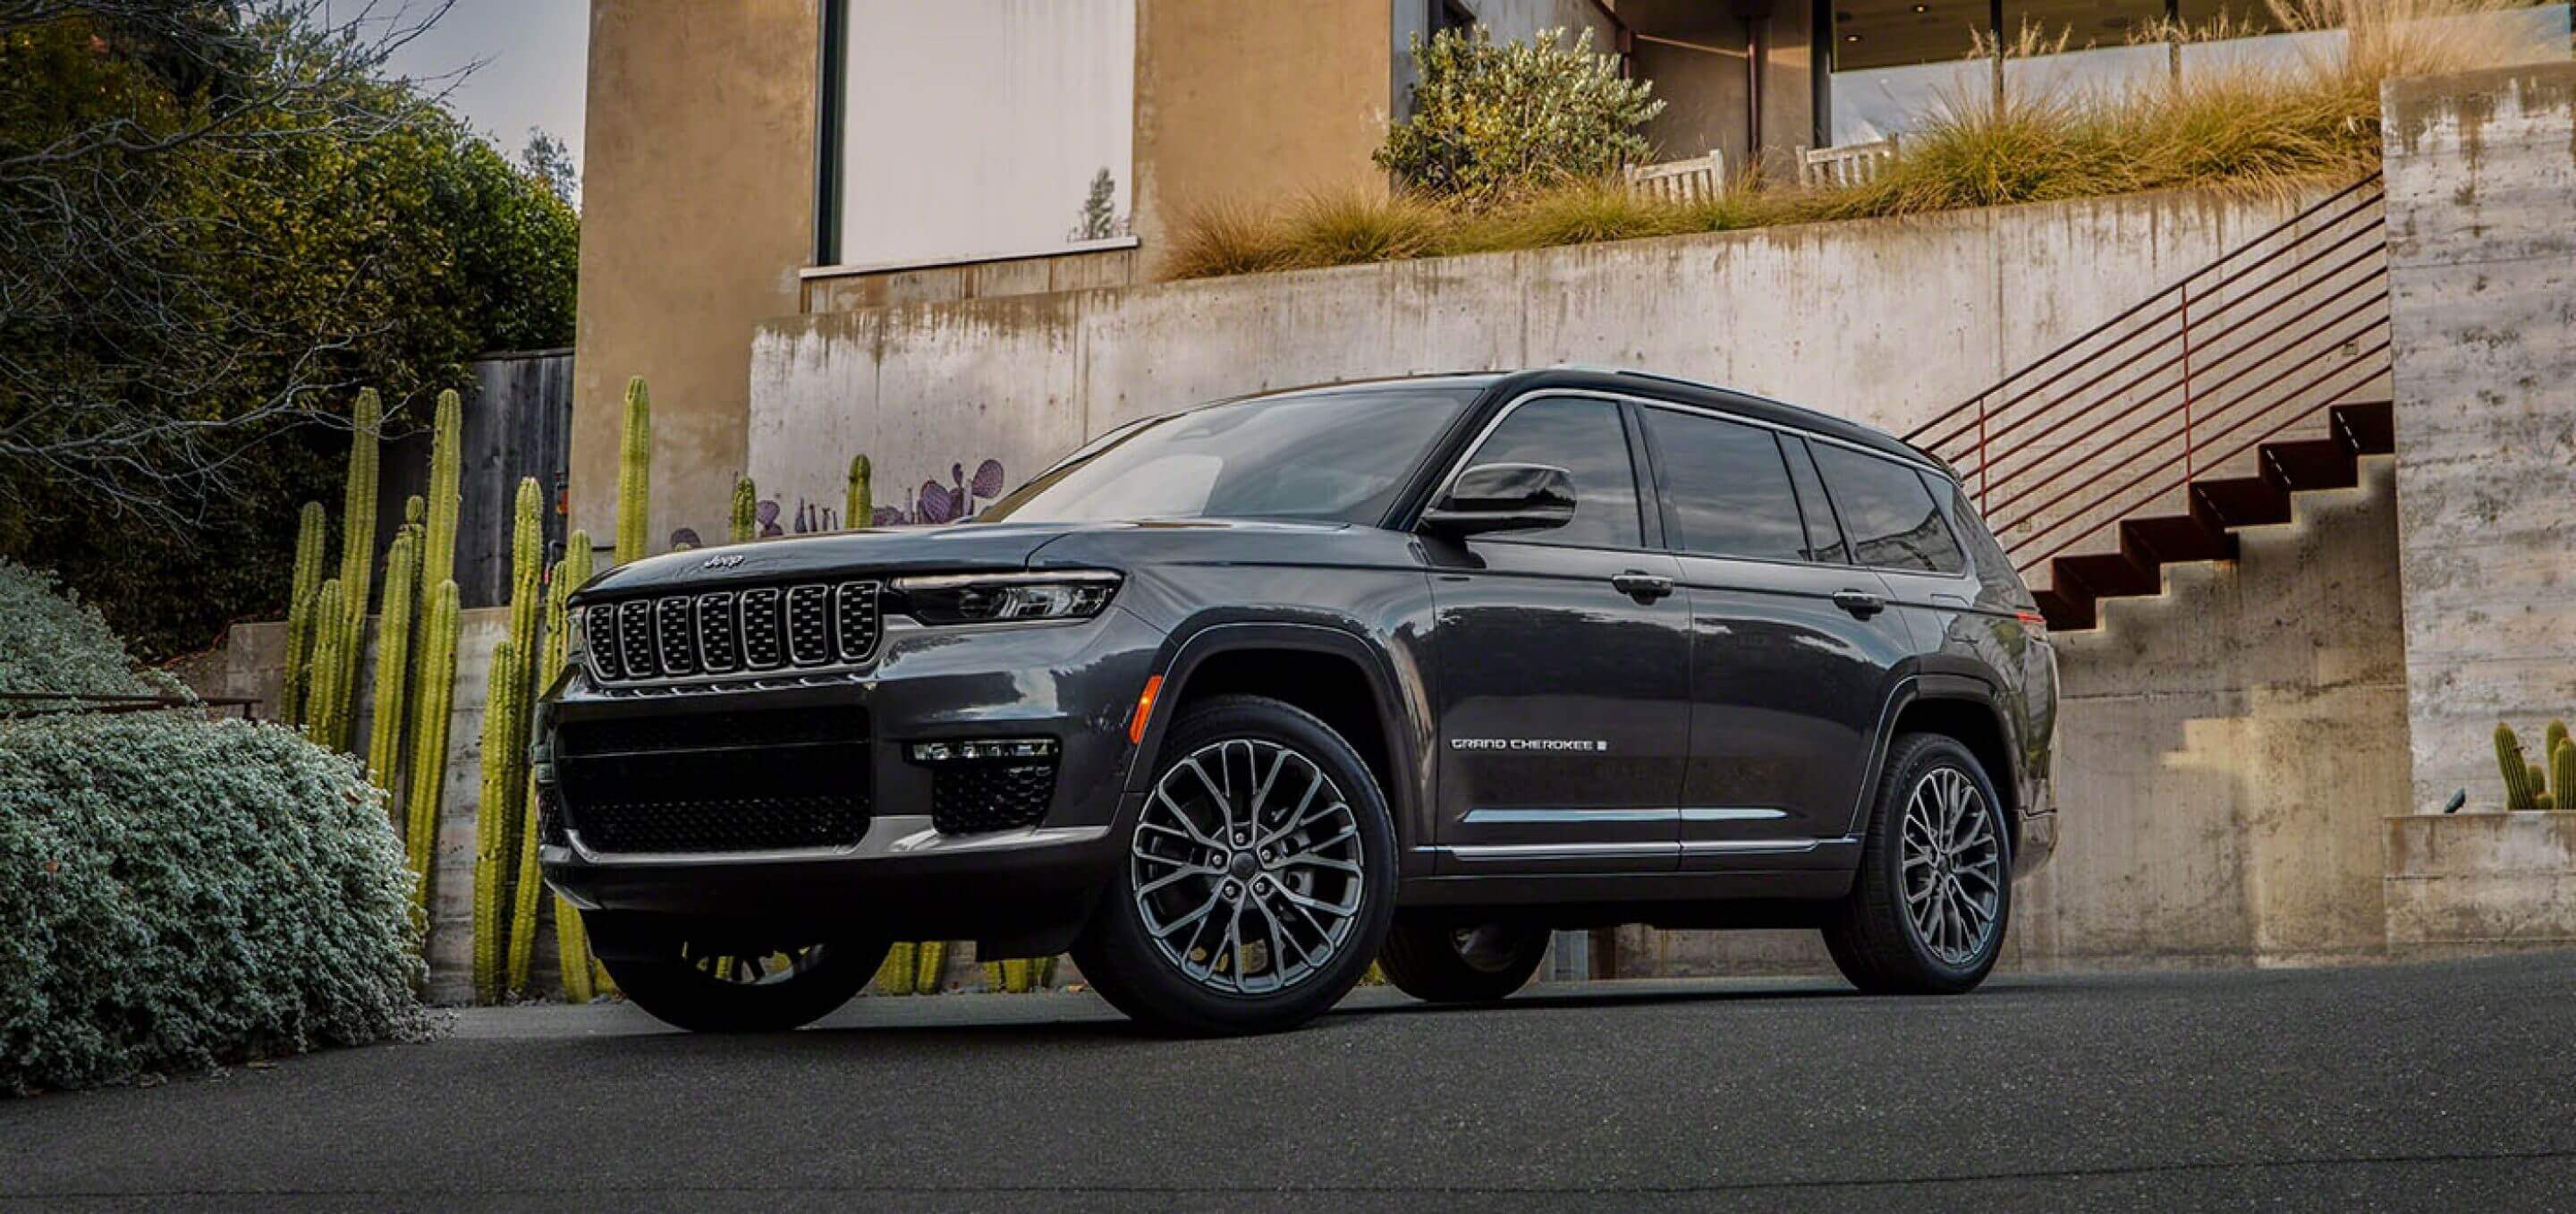 Jeep Grand Cherokee exterior - Front Left Angled